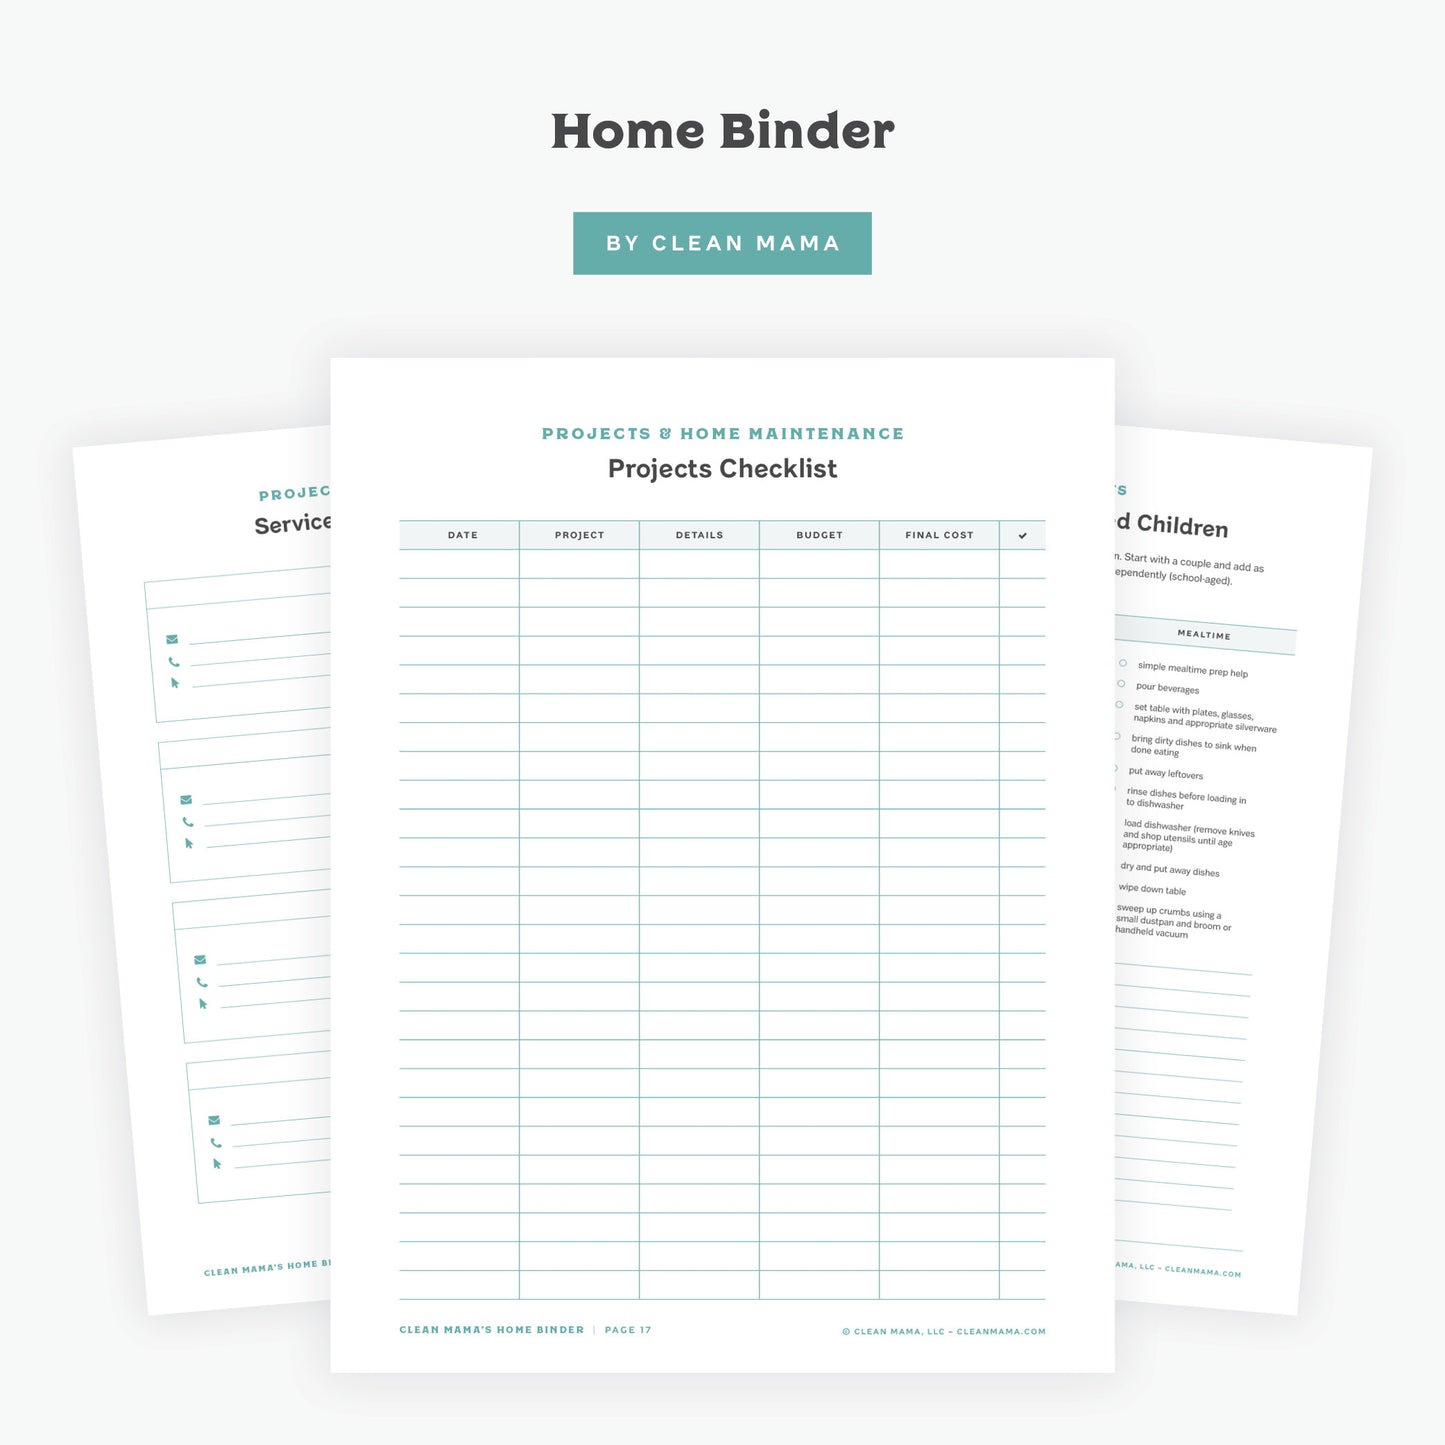 Home Binder Guide